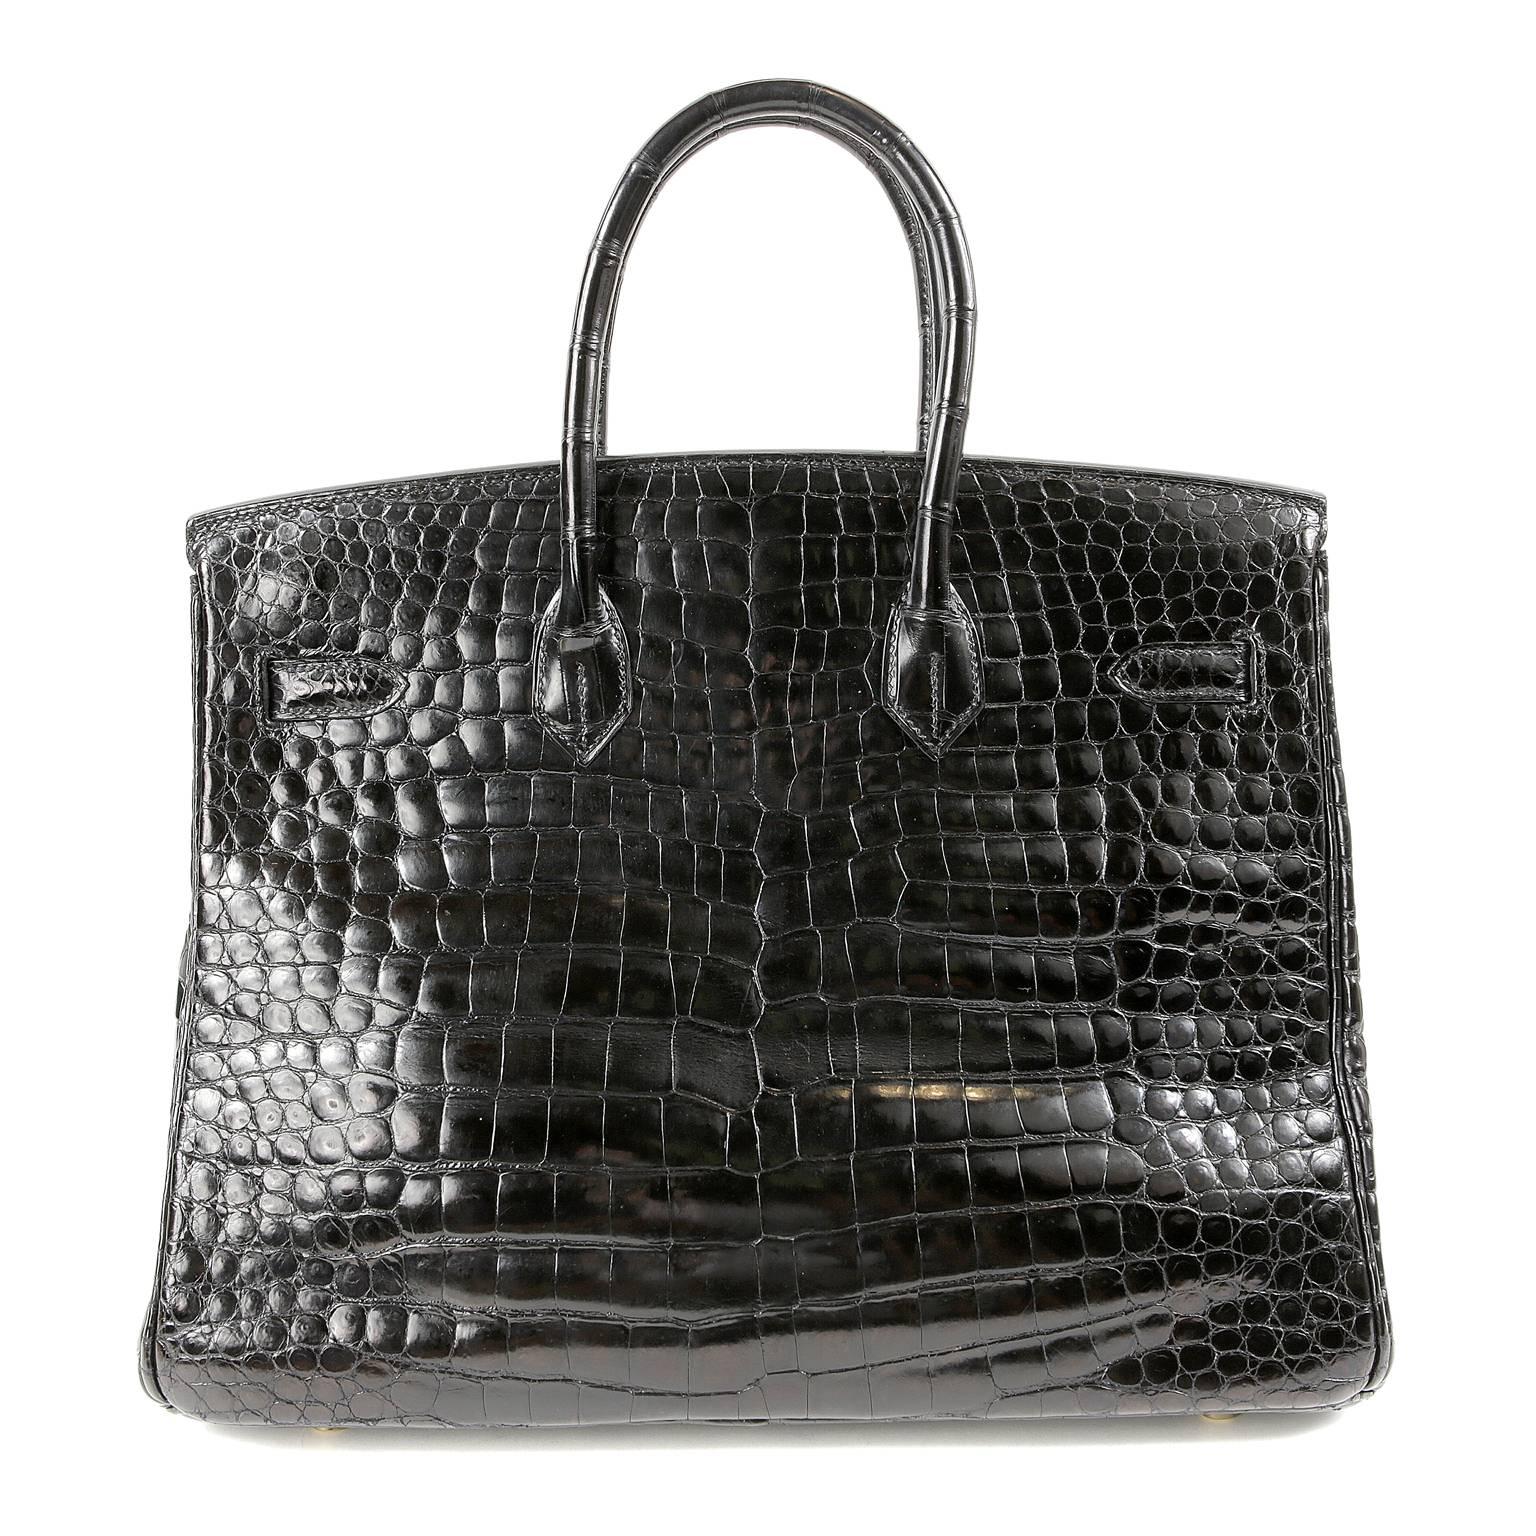 Hermès Black Shiny Porosus Crocodile 35cm Birkin - nearly pristine condition.   Incredibly rare and specially ordered, this exotic Birkin is truly stunning in sleek black croc with gold hardware. 
 Hermès bags are considered the ultimate luxury